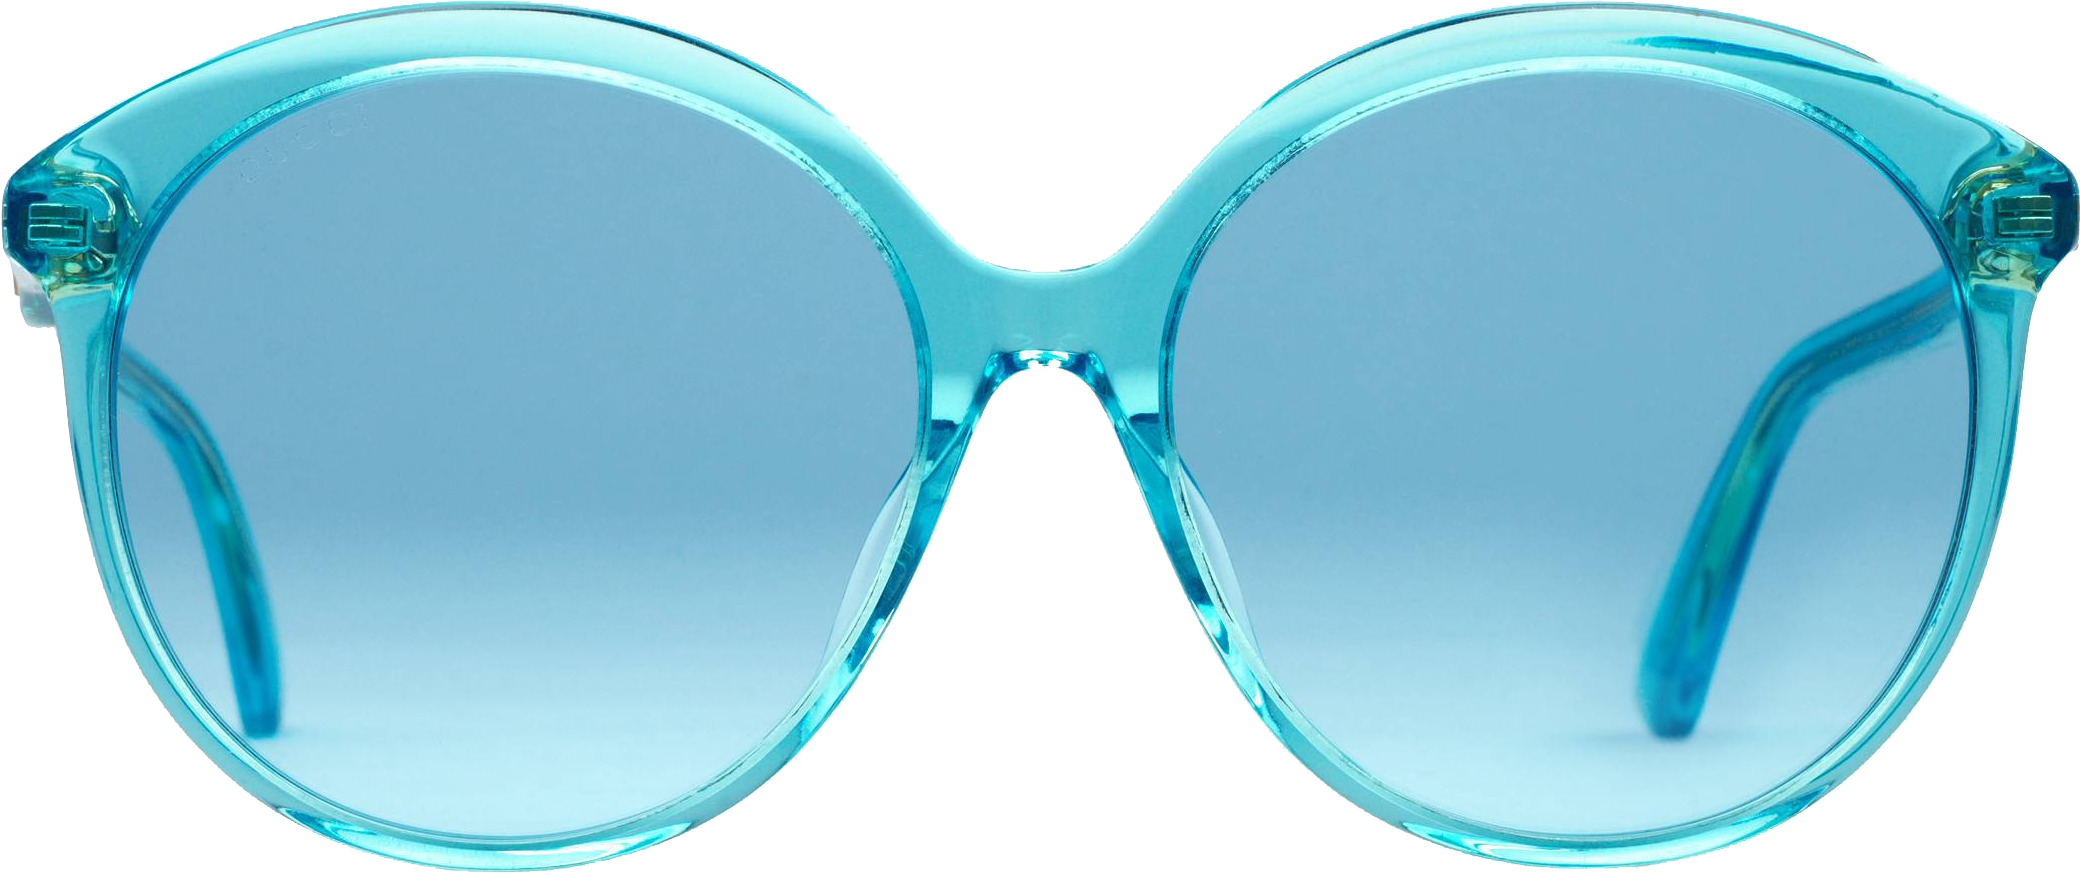 Specialized Fit Round-frame Acetate Sunglasses - Light Blue Gucci Glasses (2400x2400)